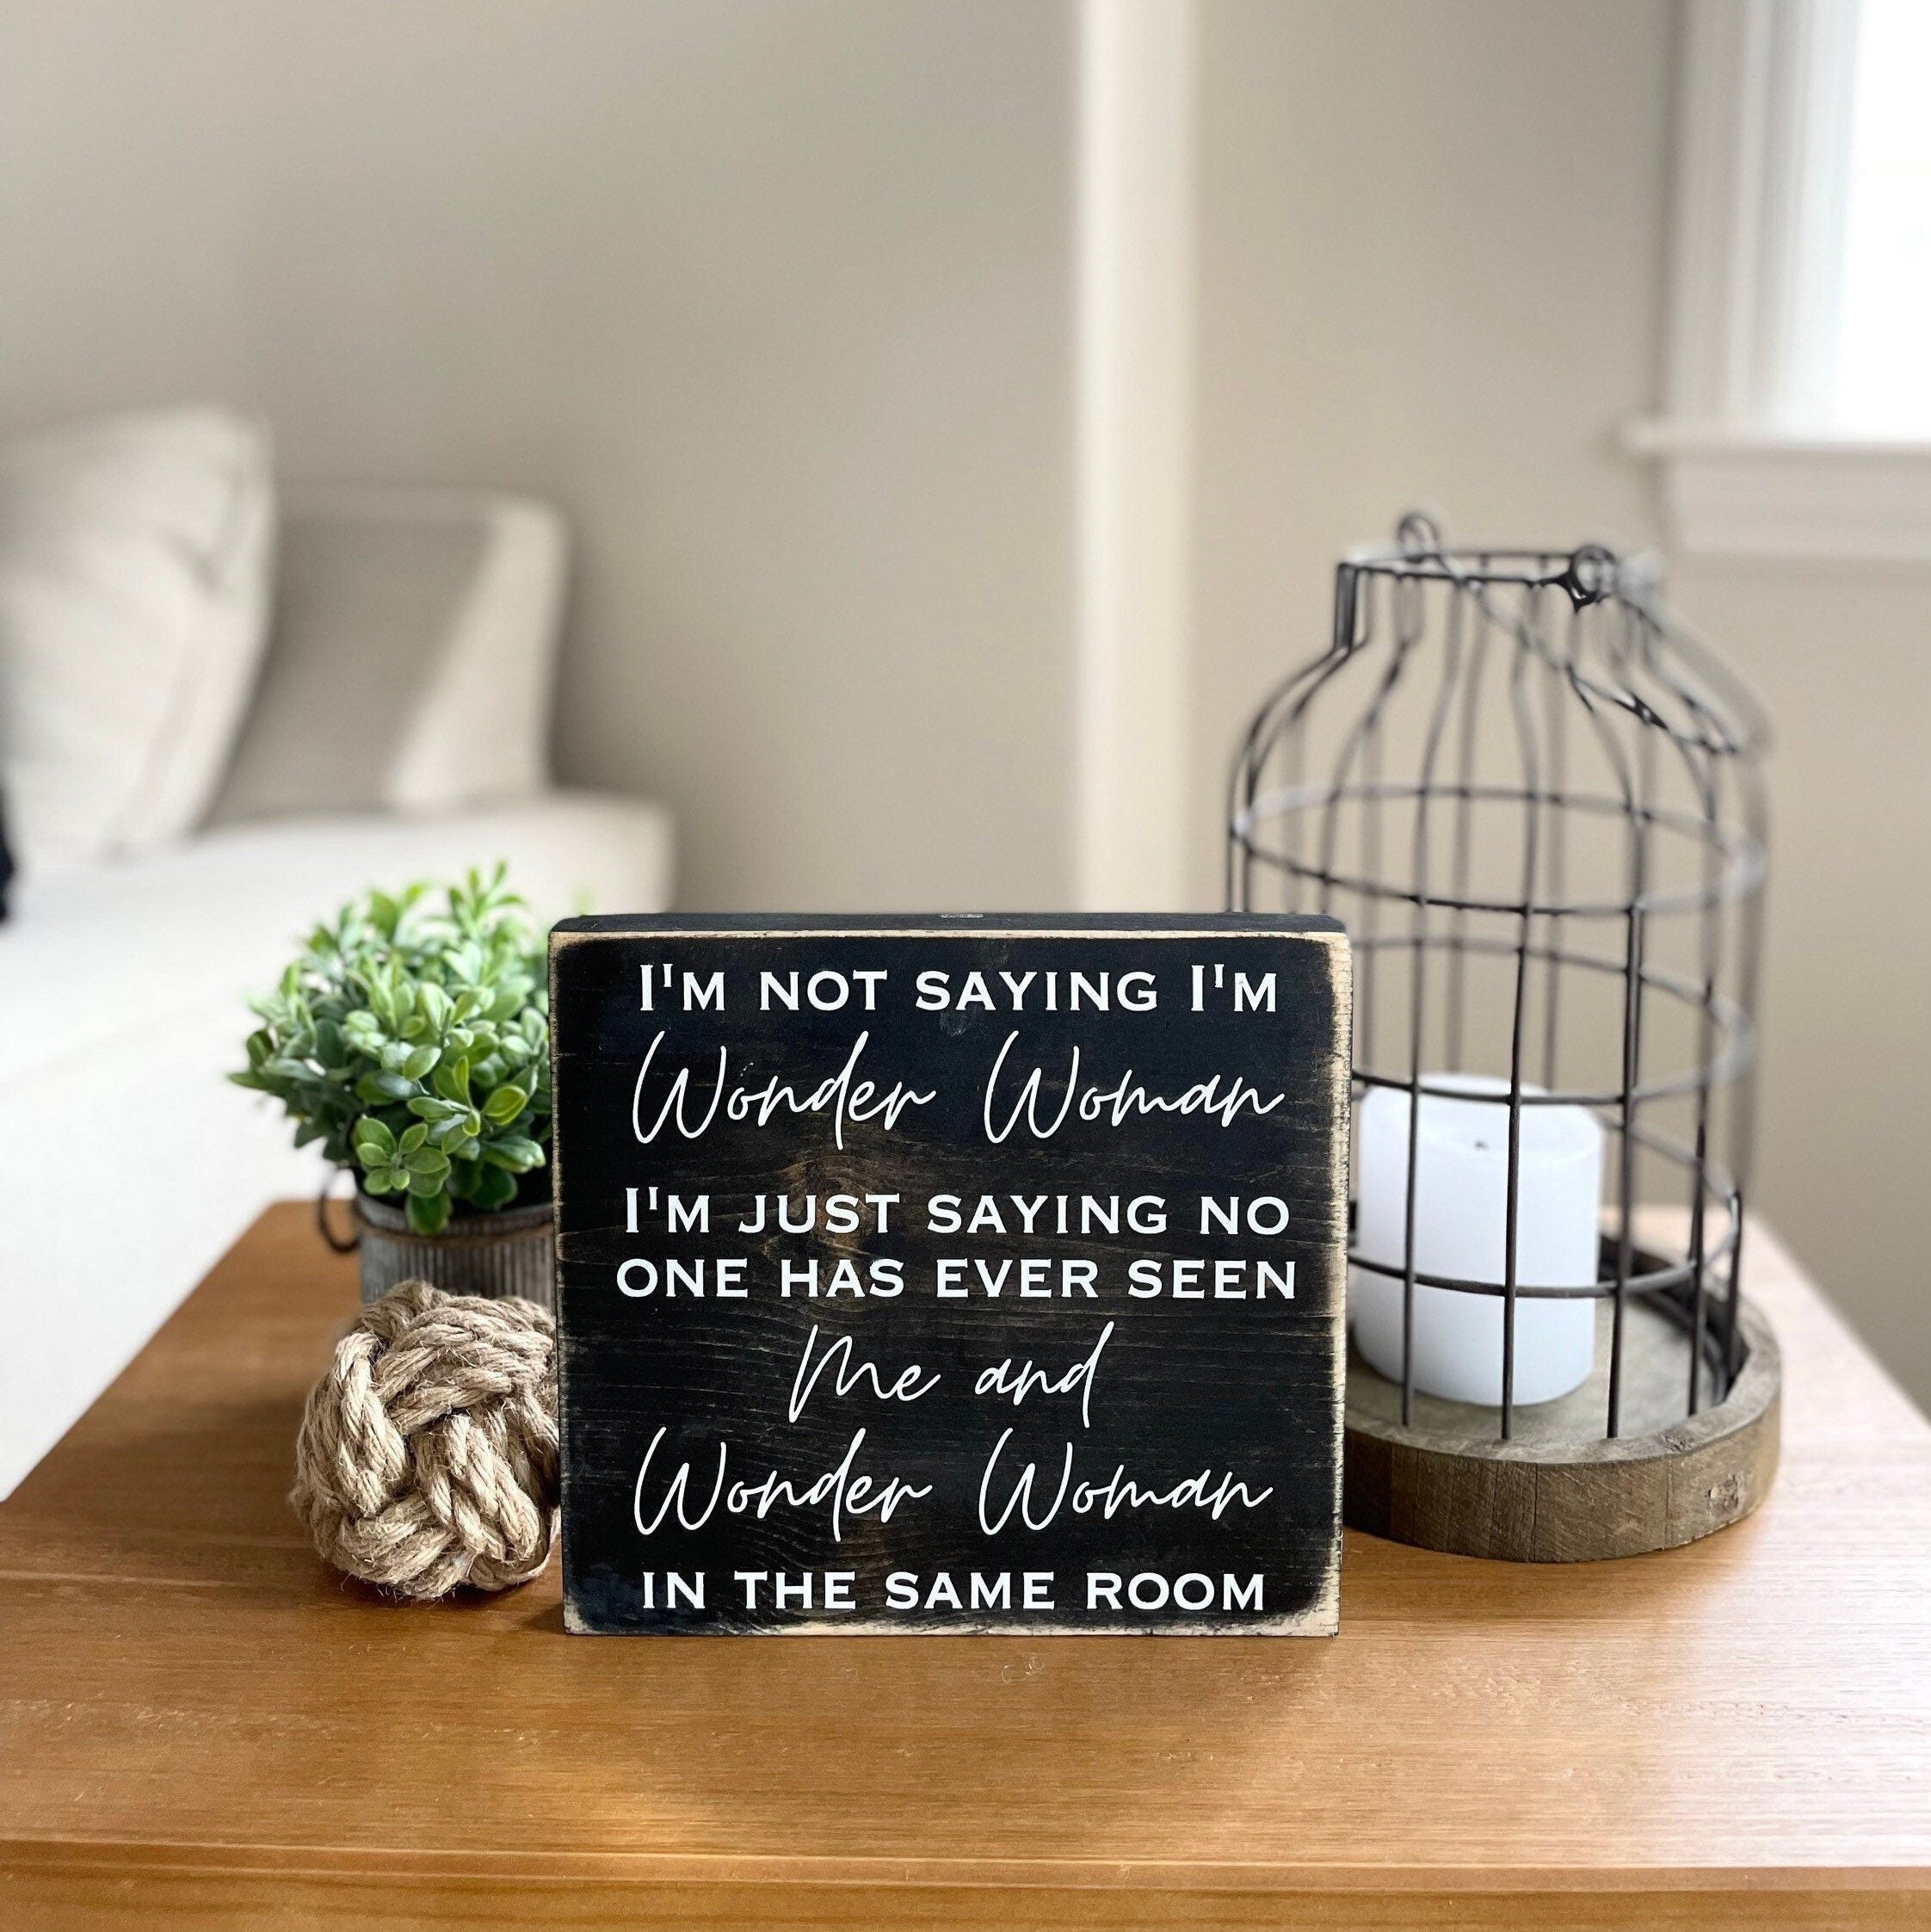 medium sized, square, rustic farmhouse style wood sign stained black with white lettering that reads, " I'm not saying I'm Wonder Woman, I'm just saying no one has ever seen me and Wonder Woman in the same room". All text is in all caps except for "Wonder Woman" and "Me and Wonder Woman" which is in a modern script font. Text is centered and takes up the entire area.